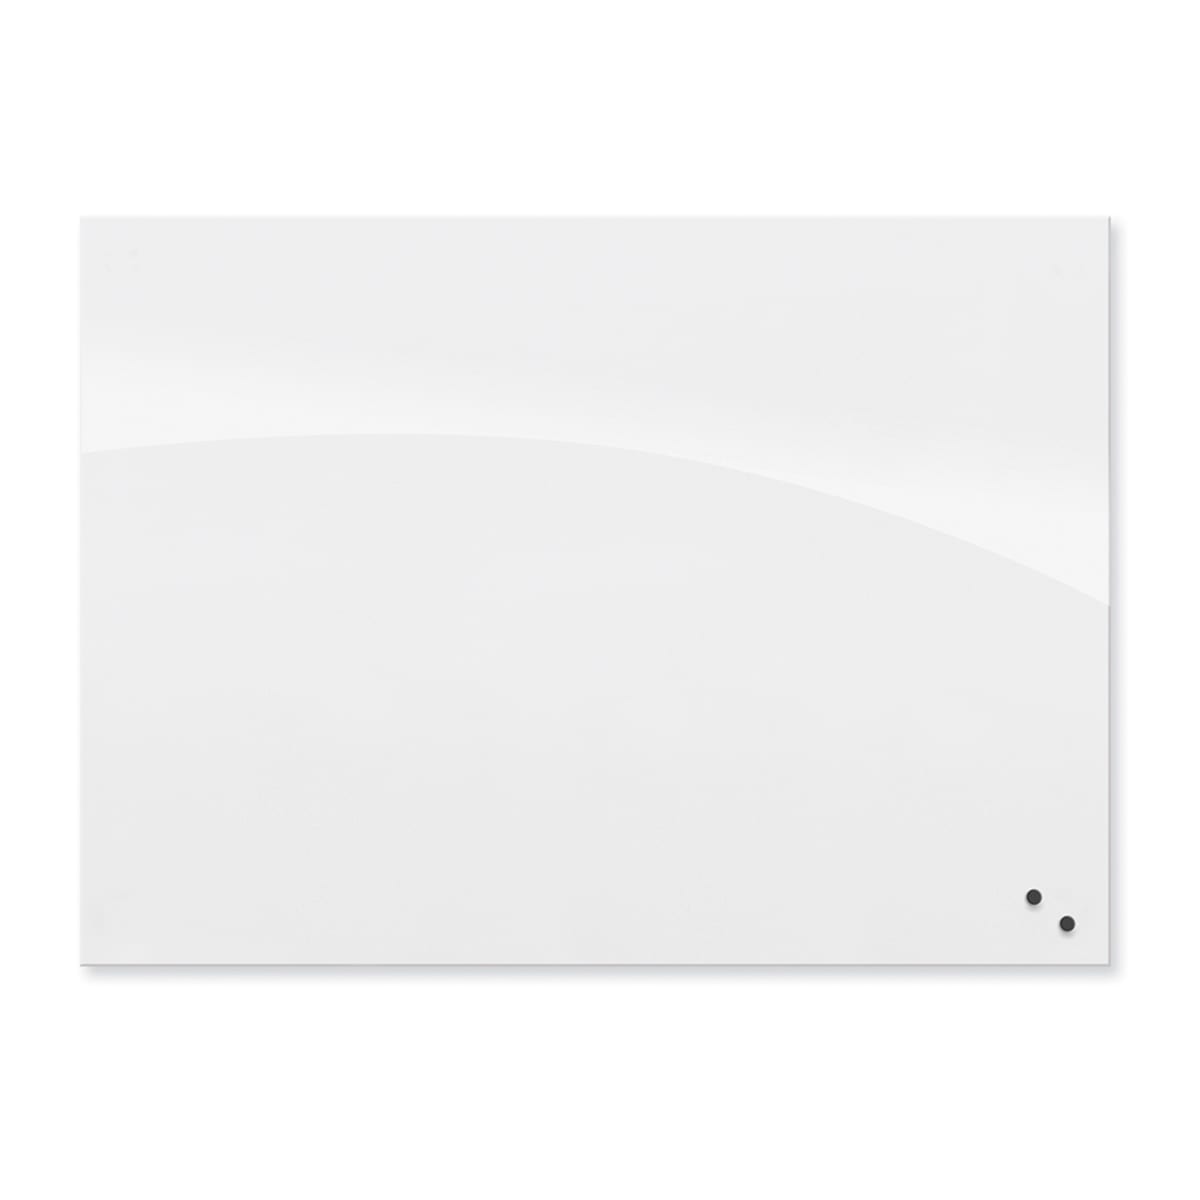 Mooreco InSight Low Iron Magnetic Glass Board - Gloss White - 4'H x 6'W (Mooreco 83909) - SchoolOutlet